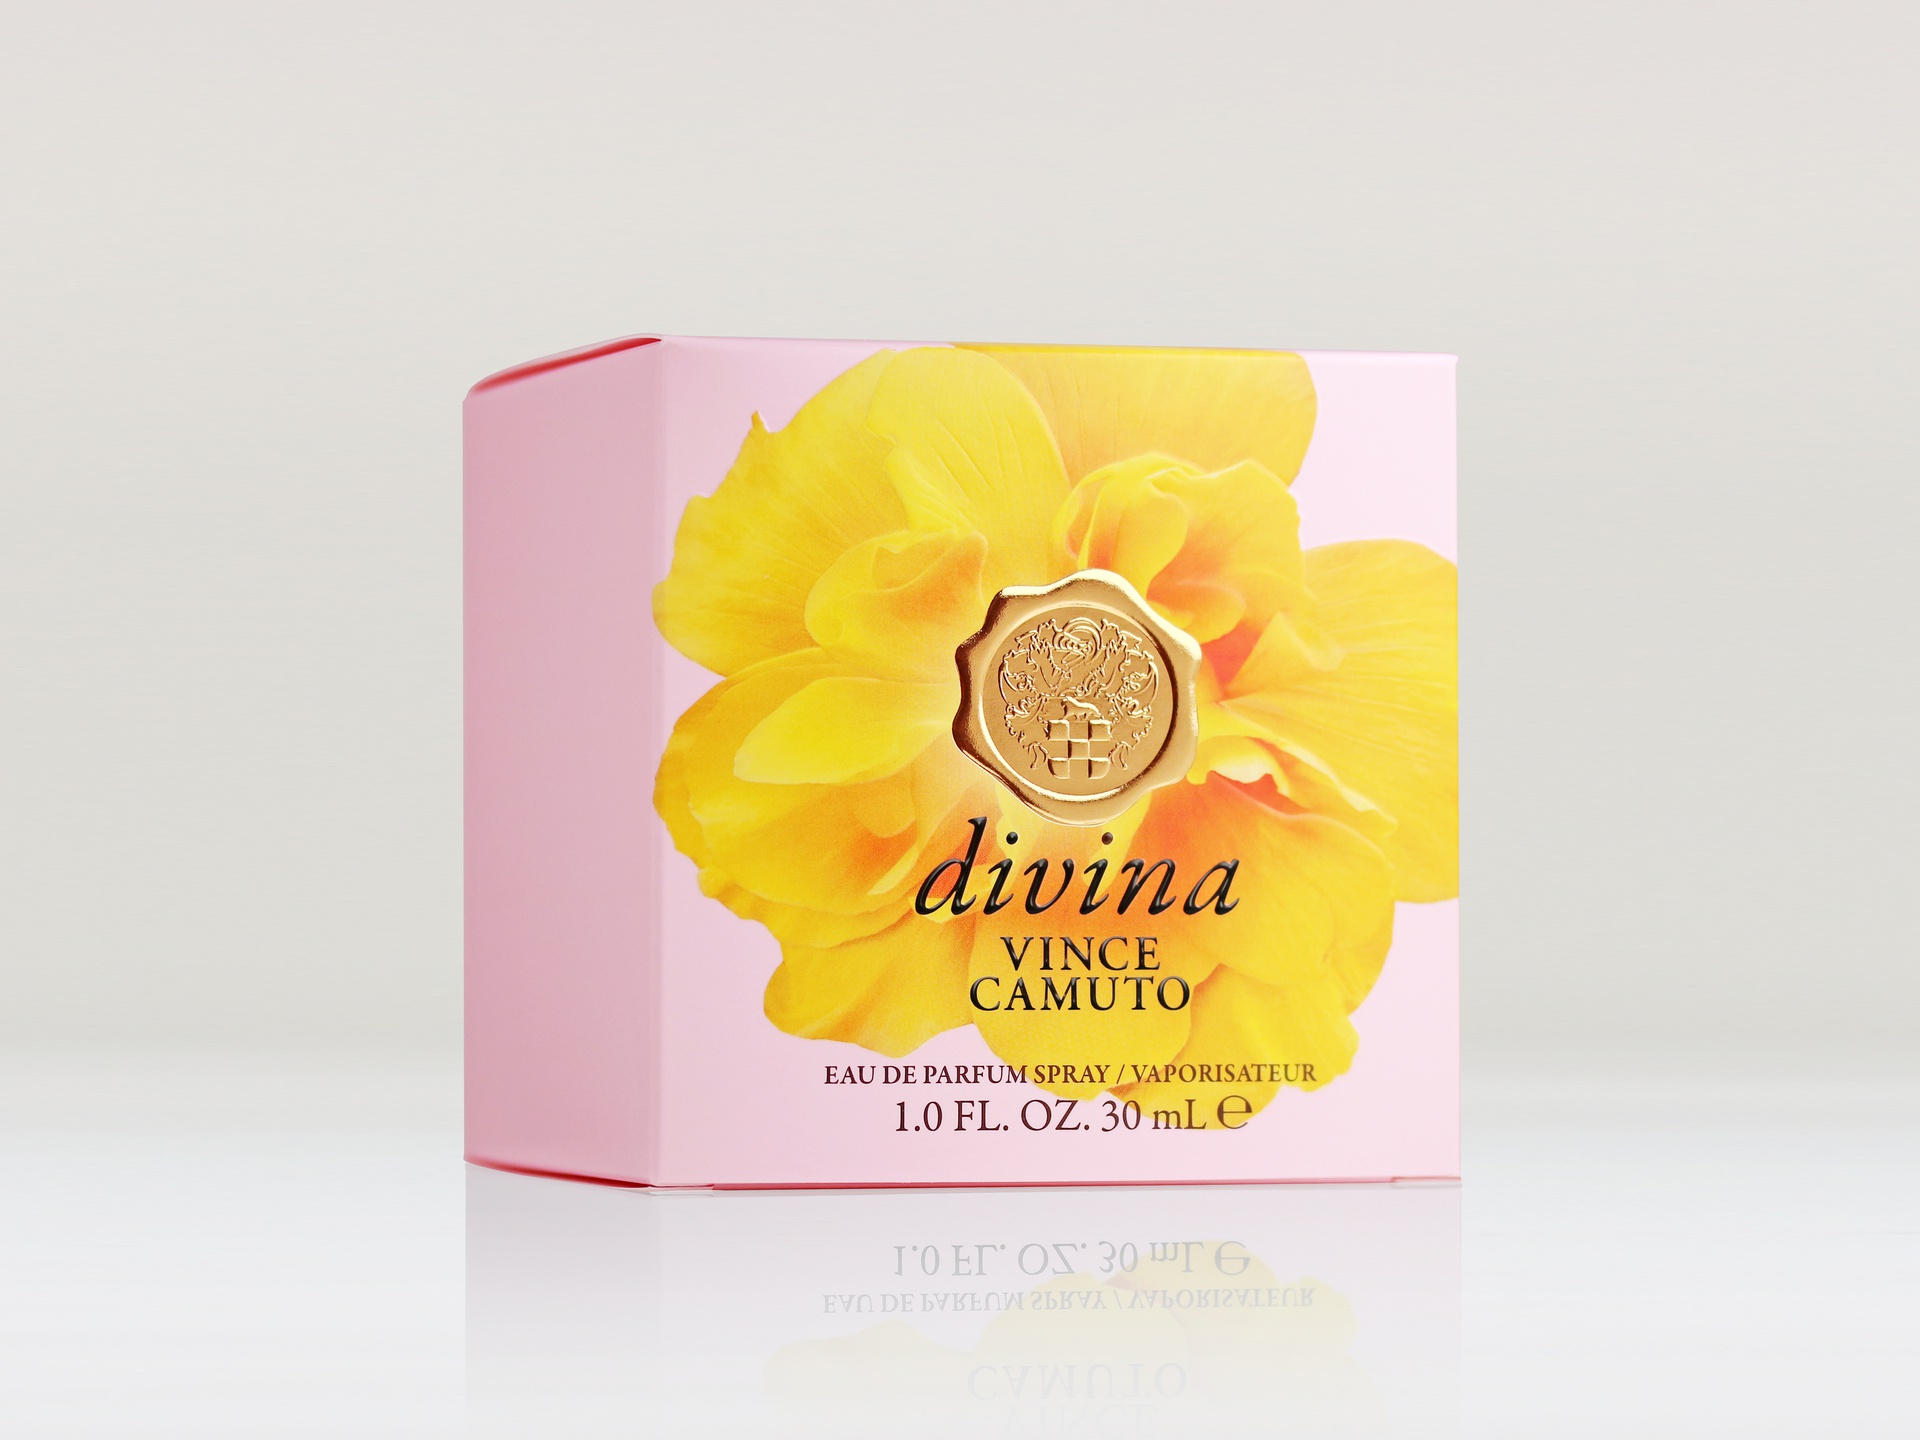 Divina Vince Camuto cartons feature multi-level embossing